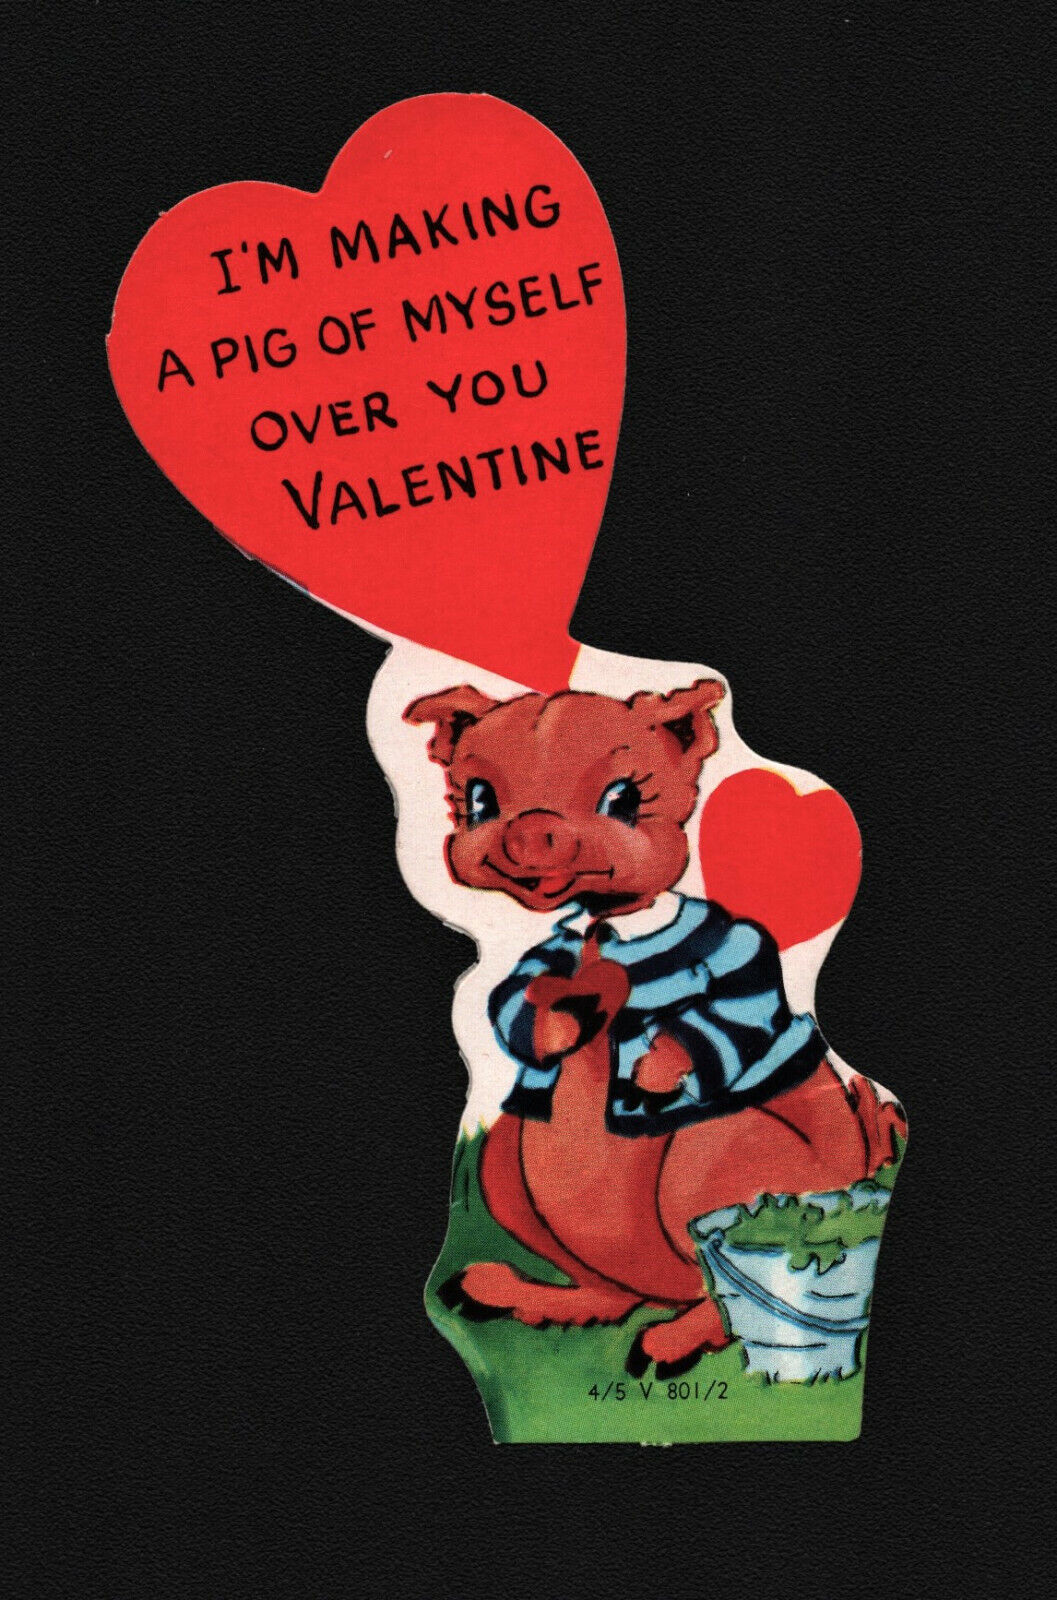 Primary image for Vintage Valentines Day Card Pig In Striped Shirt